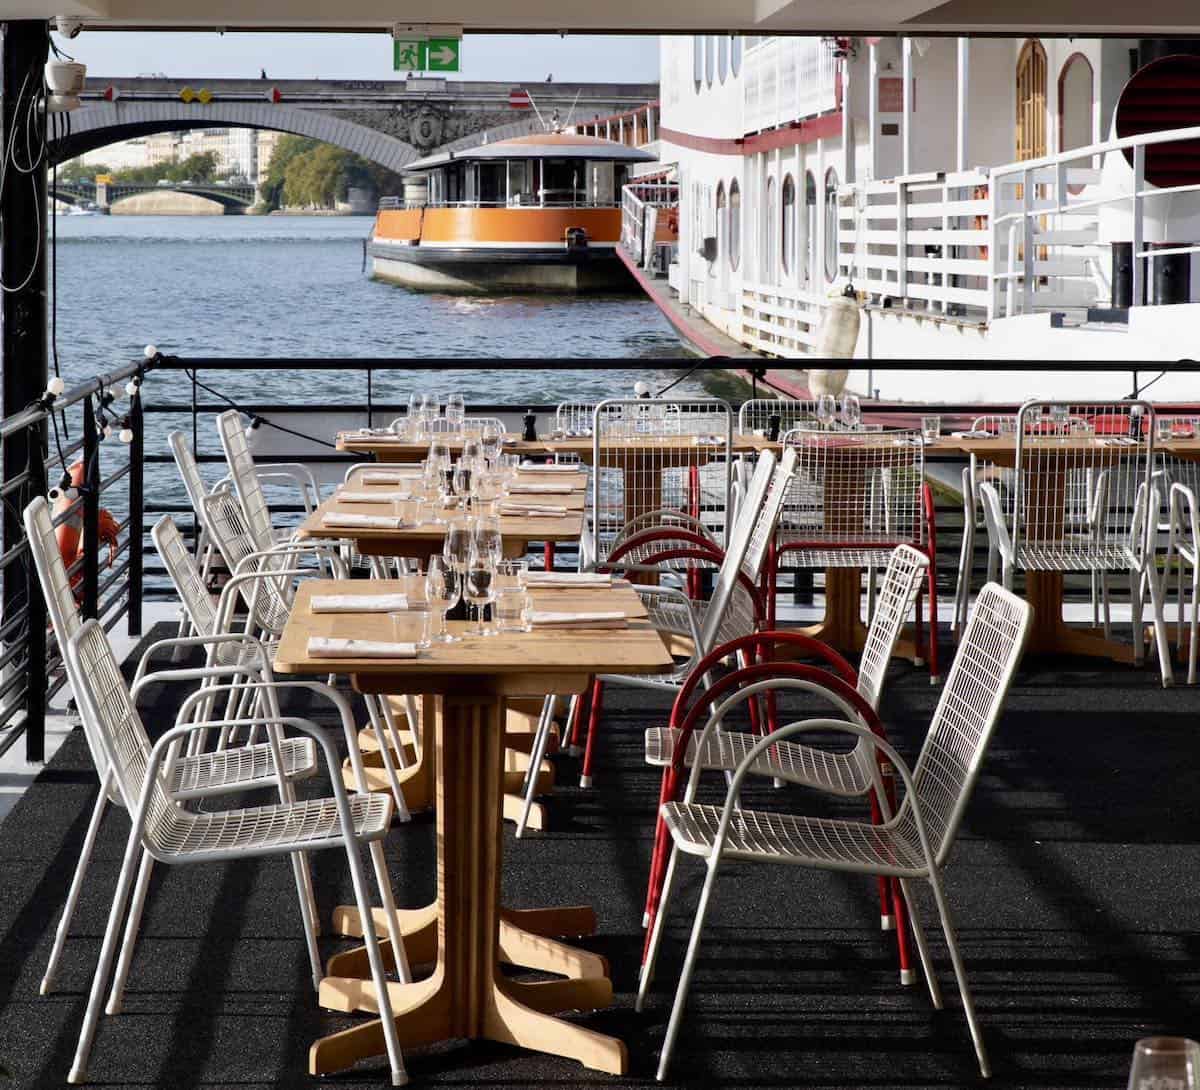 The waterside terrace at Facette restaurant with a moored boat in the background.